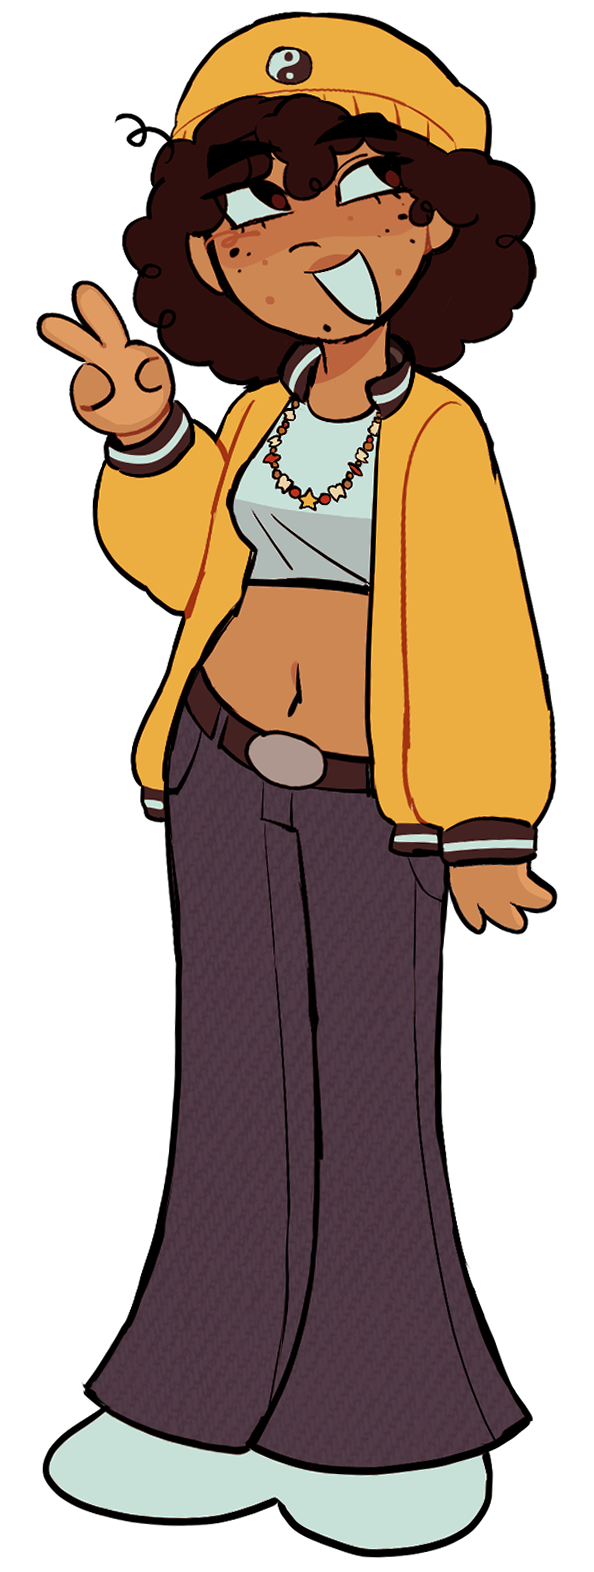 A cartoony digital illustration of a character with tan skin, freckles, and brown curly hair. He is wearing a yellow jacket and a matching yellow beanie, as well as bell bottom jeans, a white crop top, a brown belt with a round belt buckle and white shoes. He is standing with a slightly slouched posture and is raising his hand in a peace sign. He is smiling wide and looking off to the right.